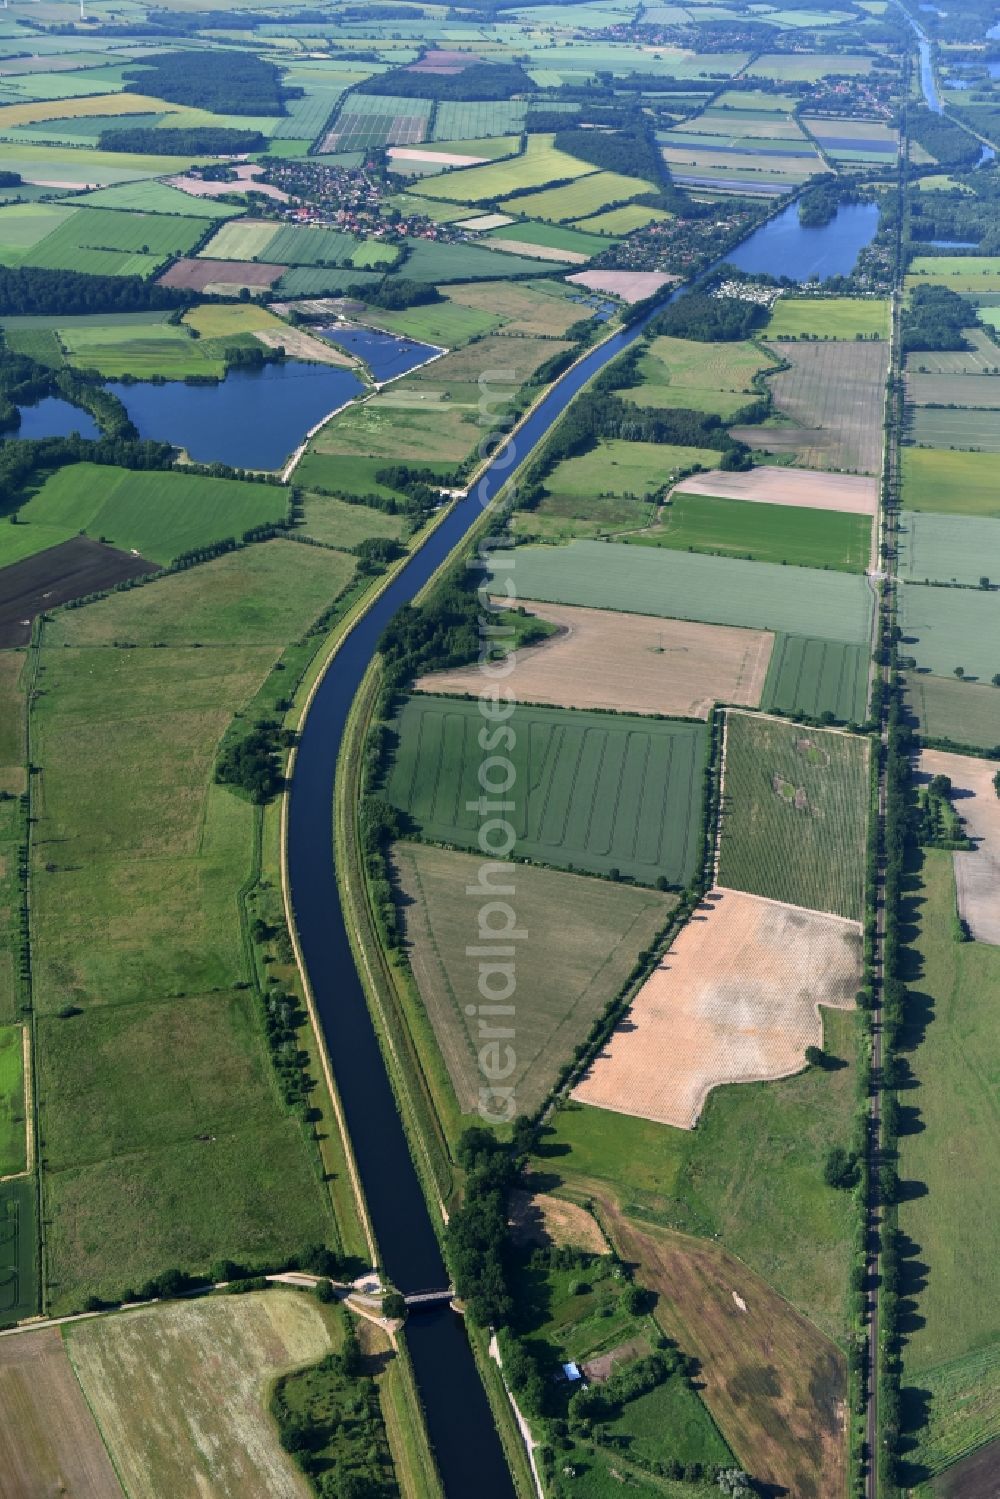 Aerial photograph Buchhorst - Agricultural road bridge Lanze-Buchhorst over the Elbe-Luebeck-Canal in Buchhorst in the state Schleswig-Holstein